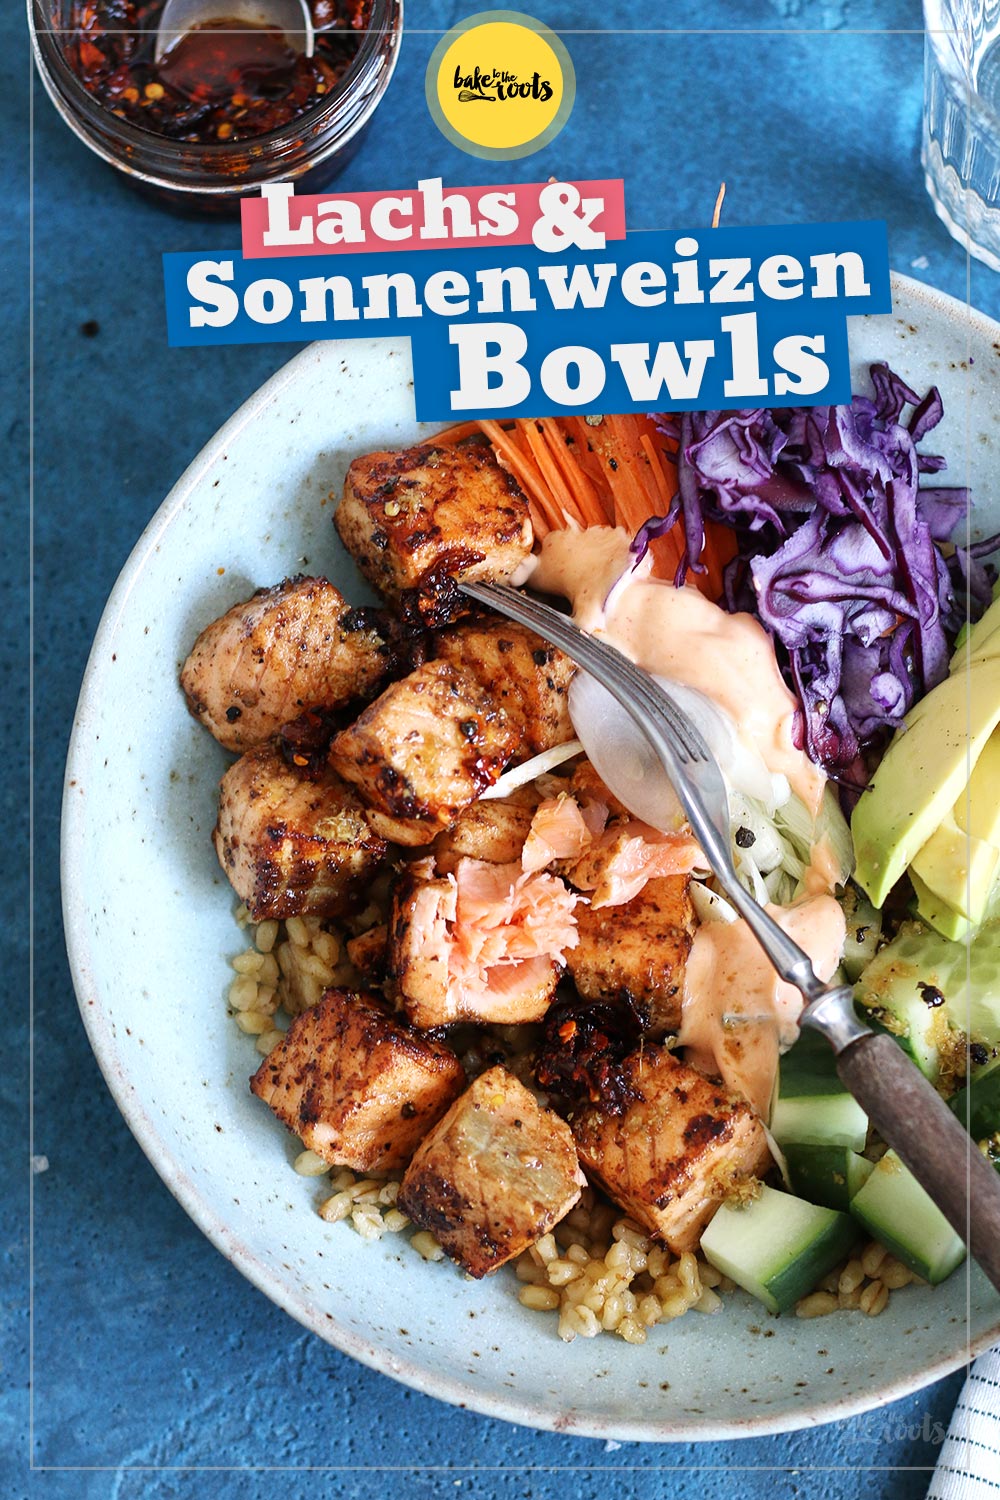 Lachs & Sonnenweizen Bowls | Bake to the roots